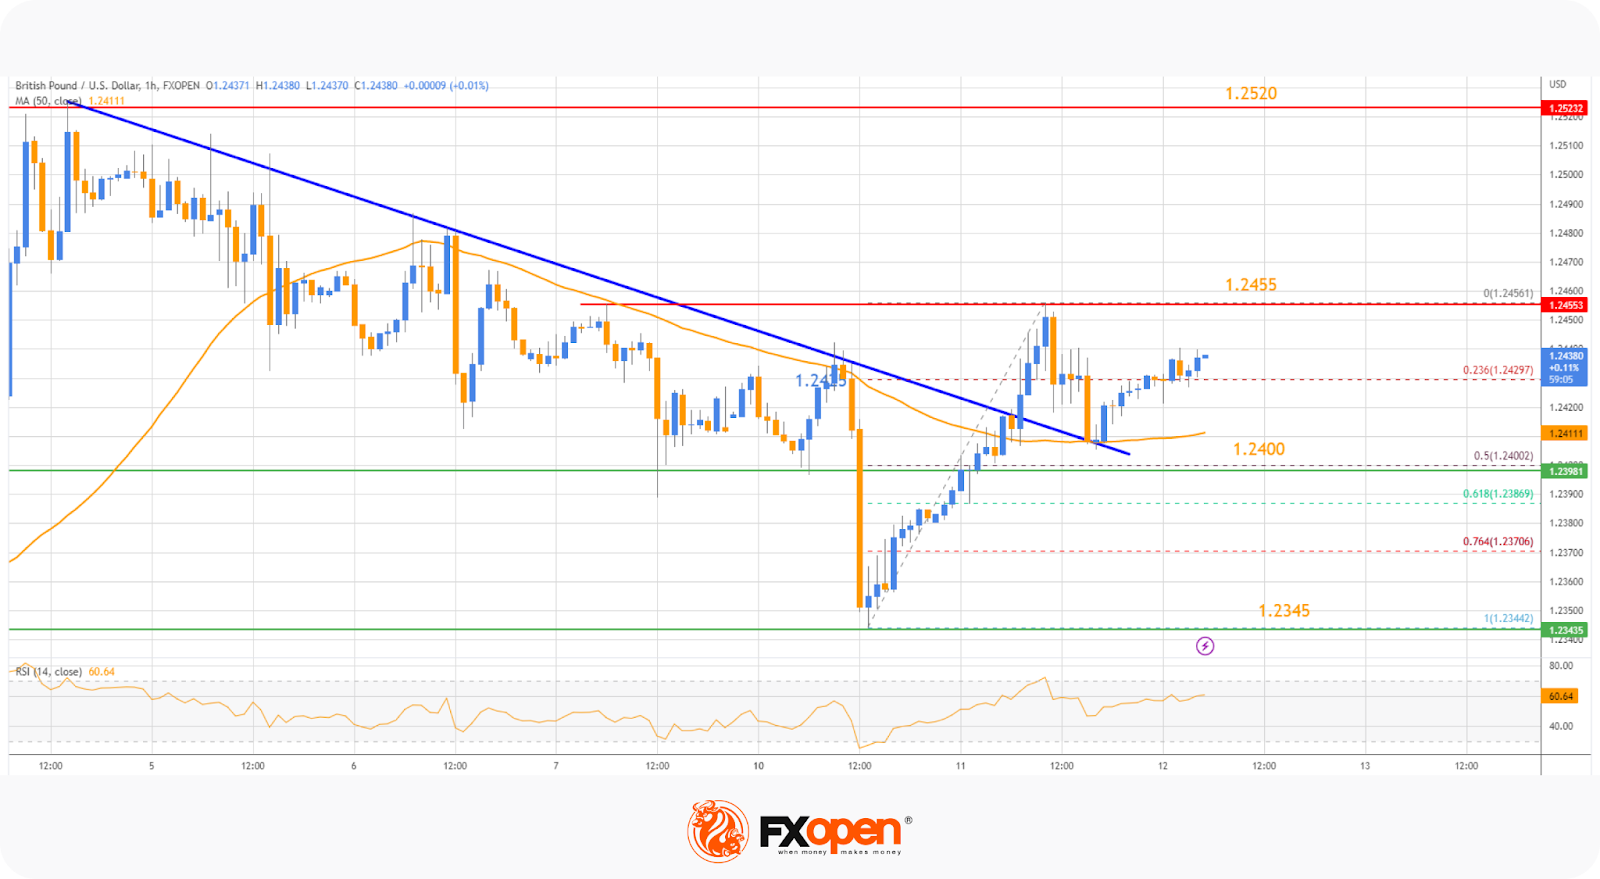 Technical Analysis for April 12: GBP/USD Starts Fresh Increase While EUR/GBP Eyes Upside Break